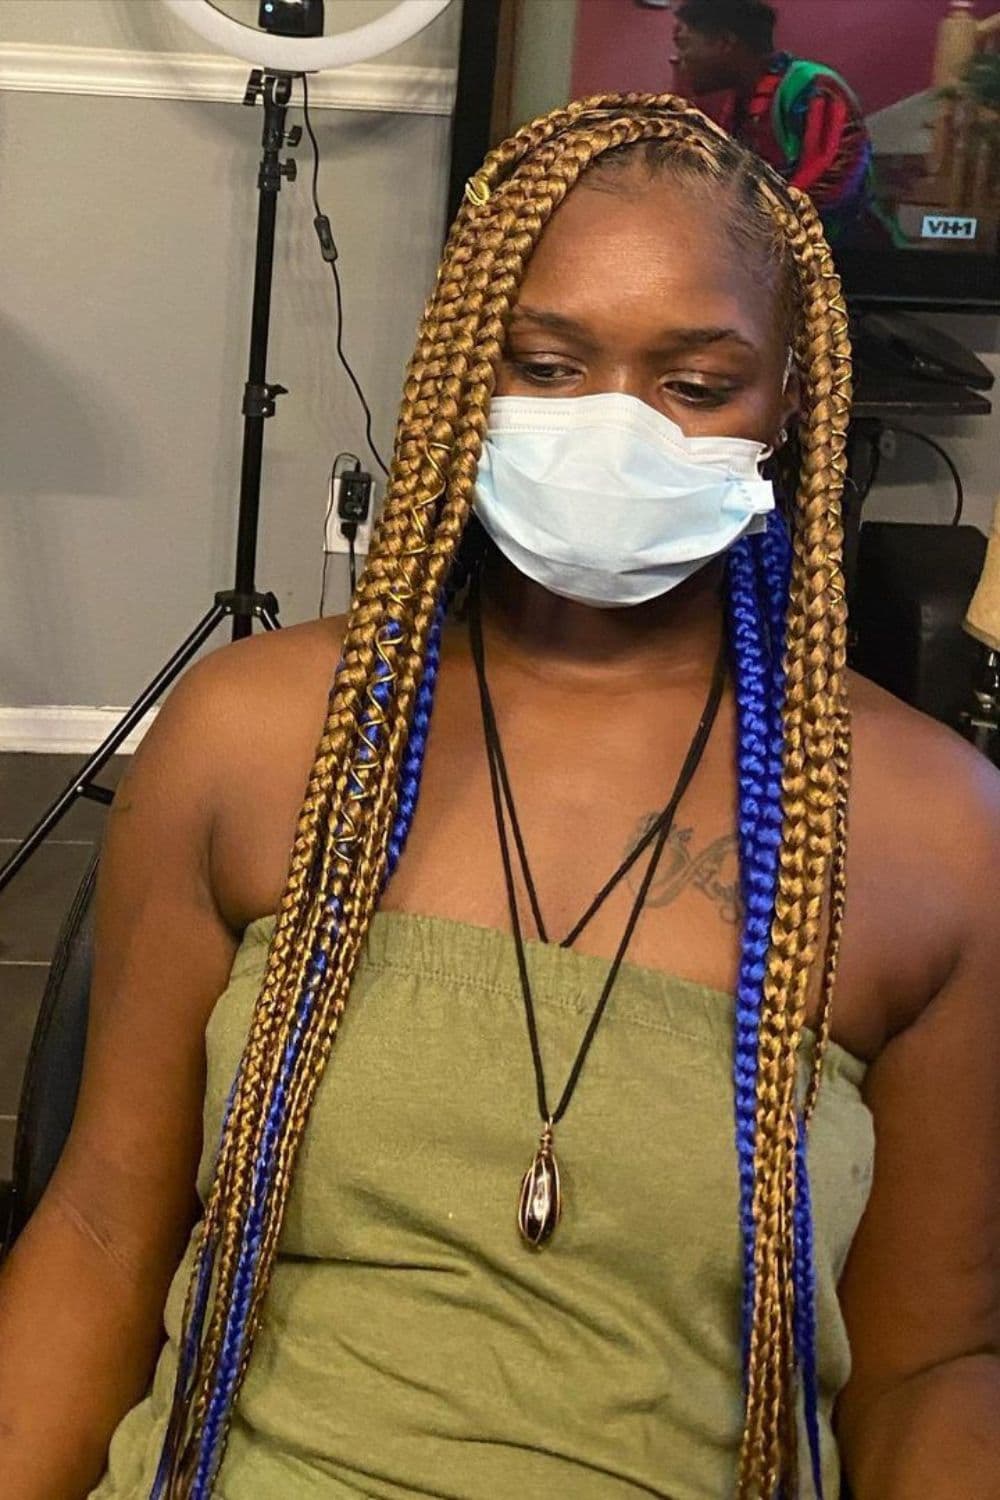 A woman with blonde and blue knotless braids is wearing a surgical mask.